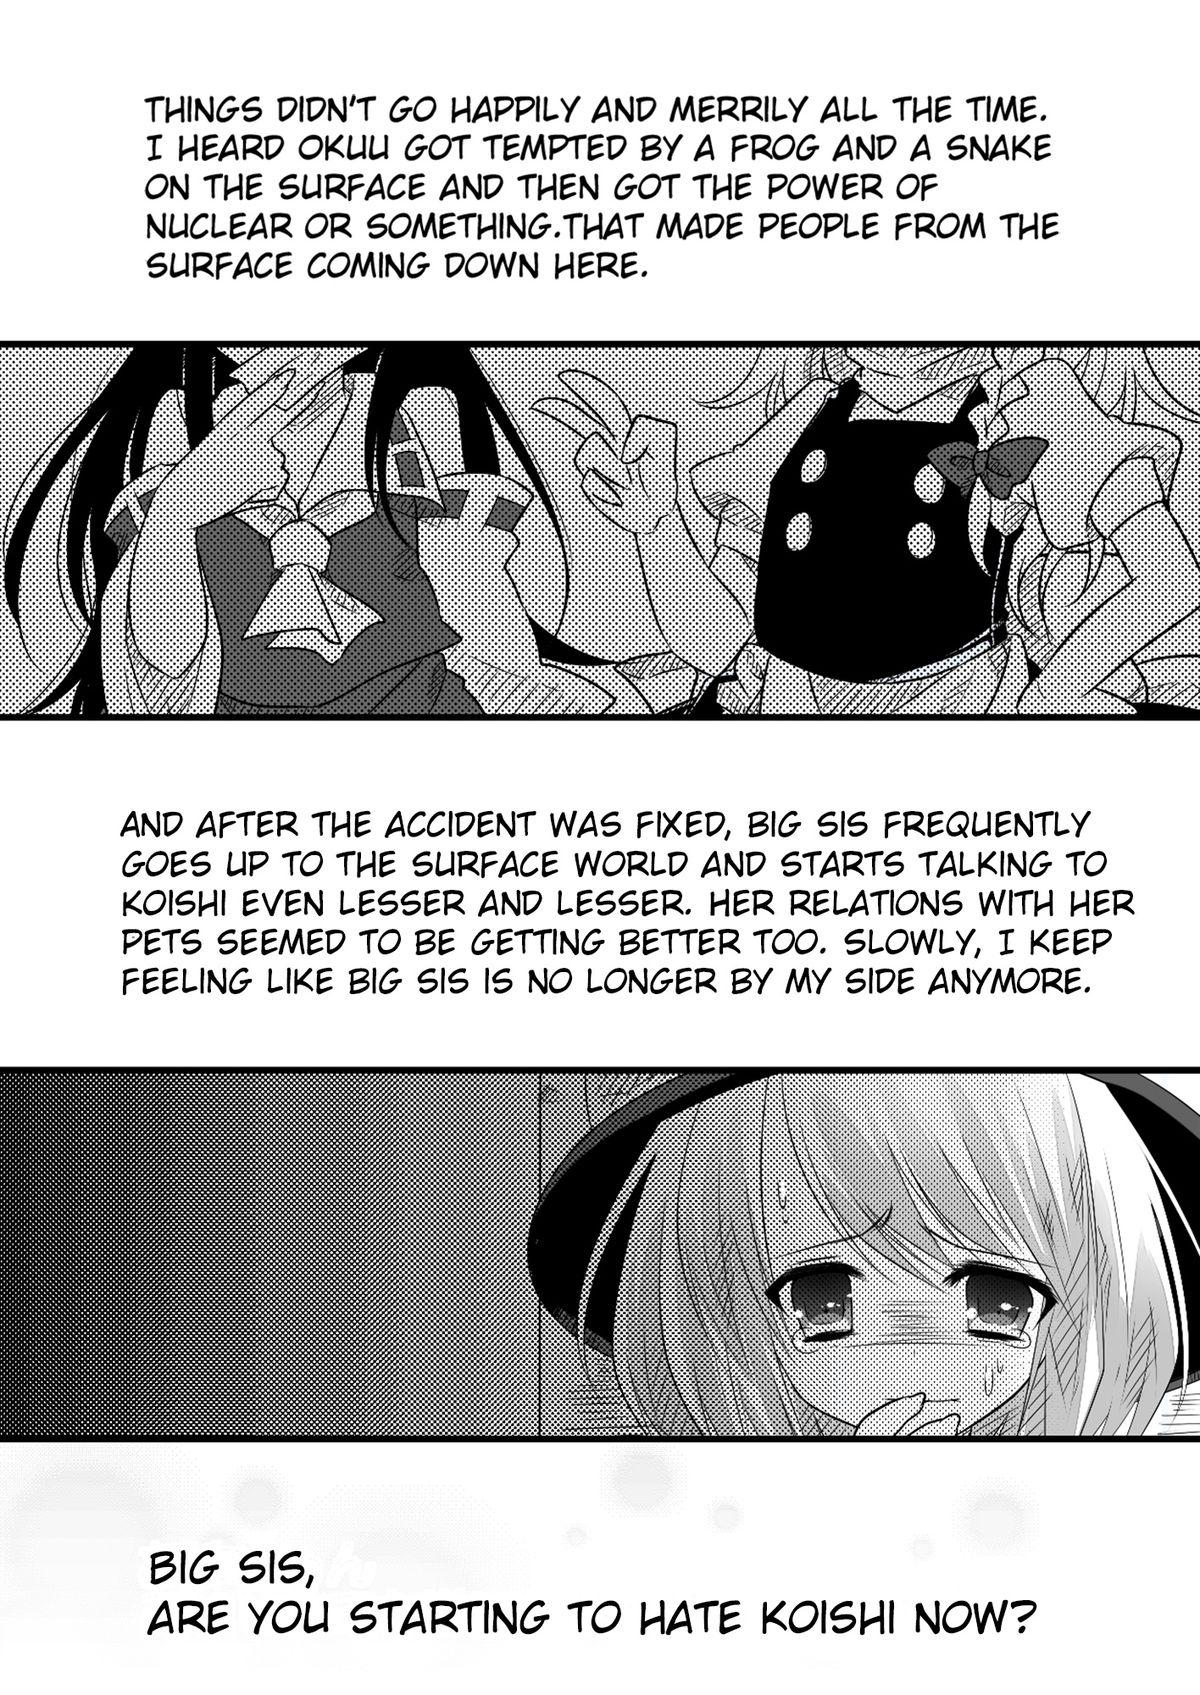 Bro The greatest hate springs from the greatest love - Touhou project Dorm - Page 4